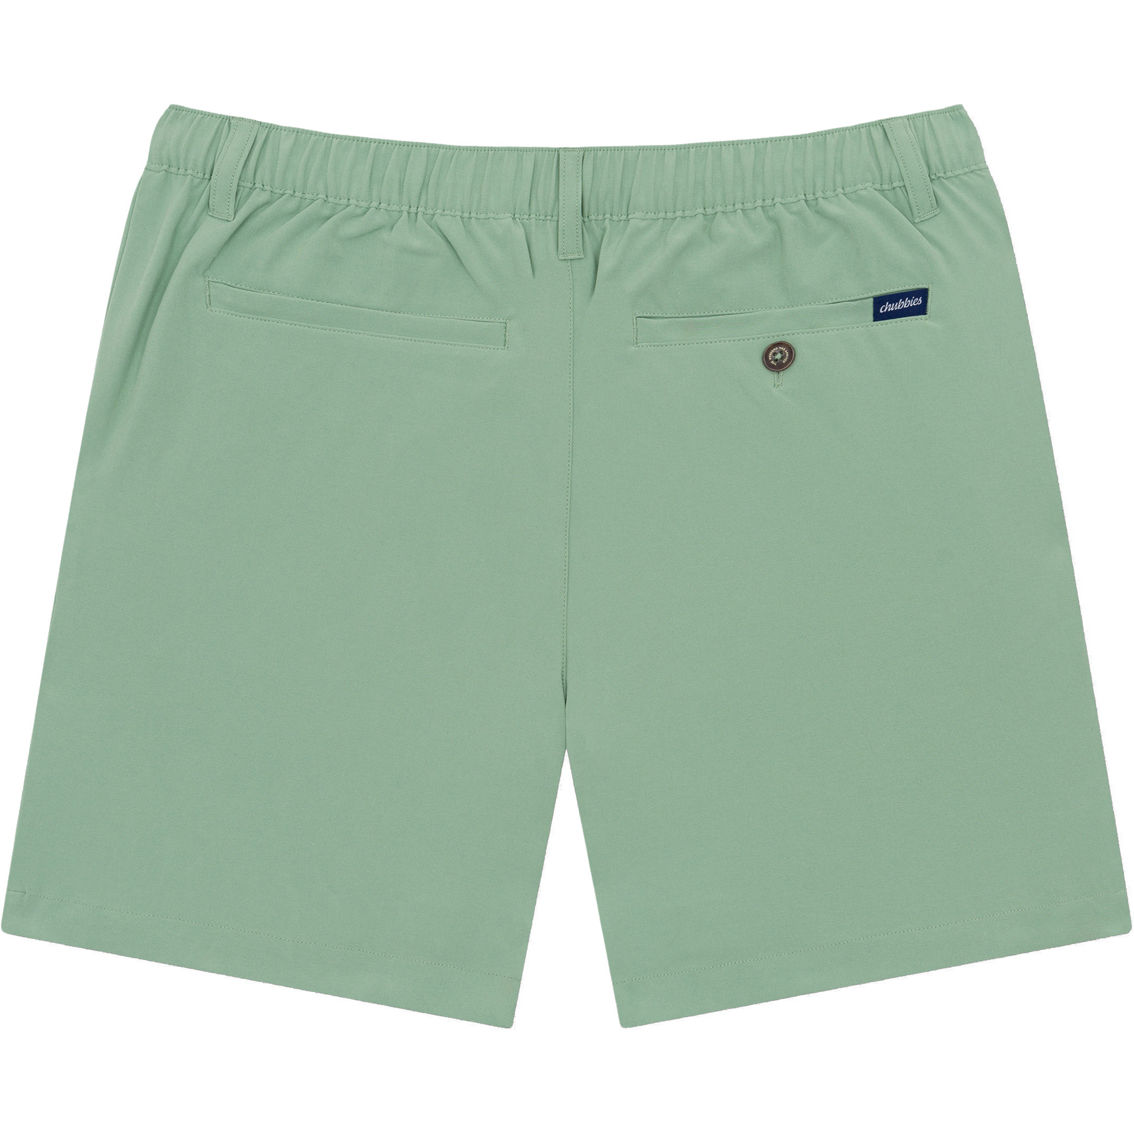 Chubbies Basils Everywear 6 in. Performance Shorts - Image 7 of 8